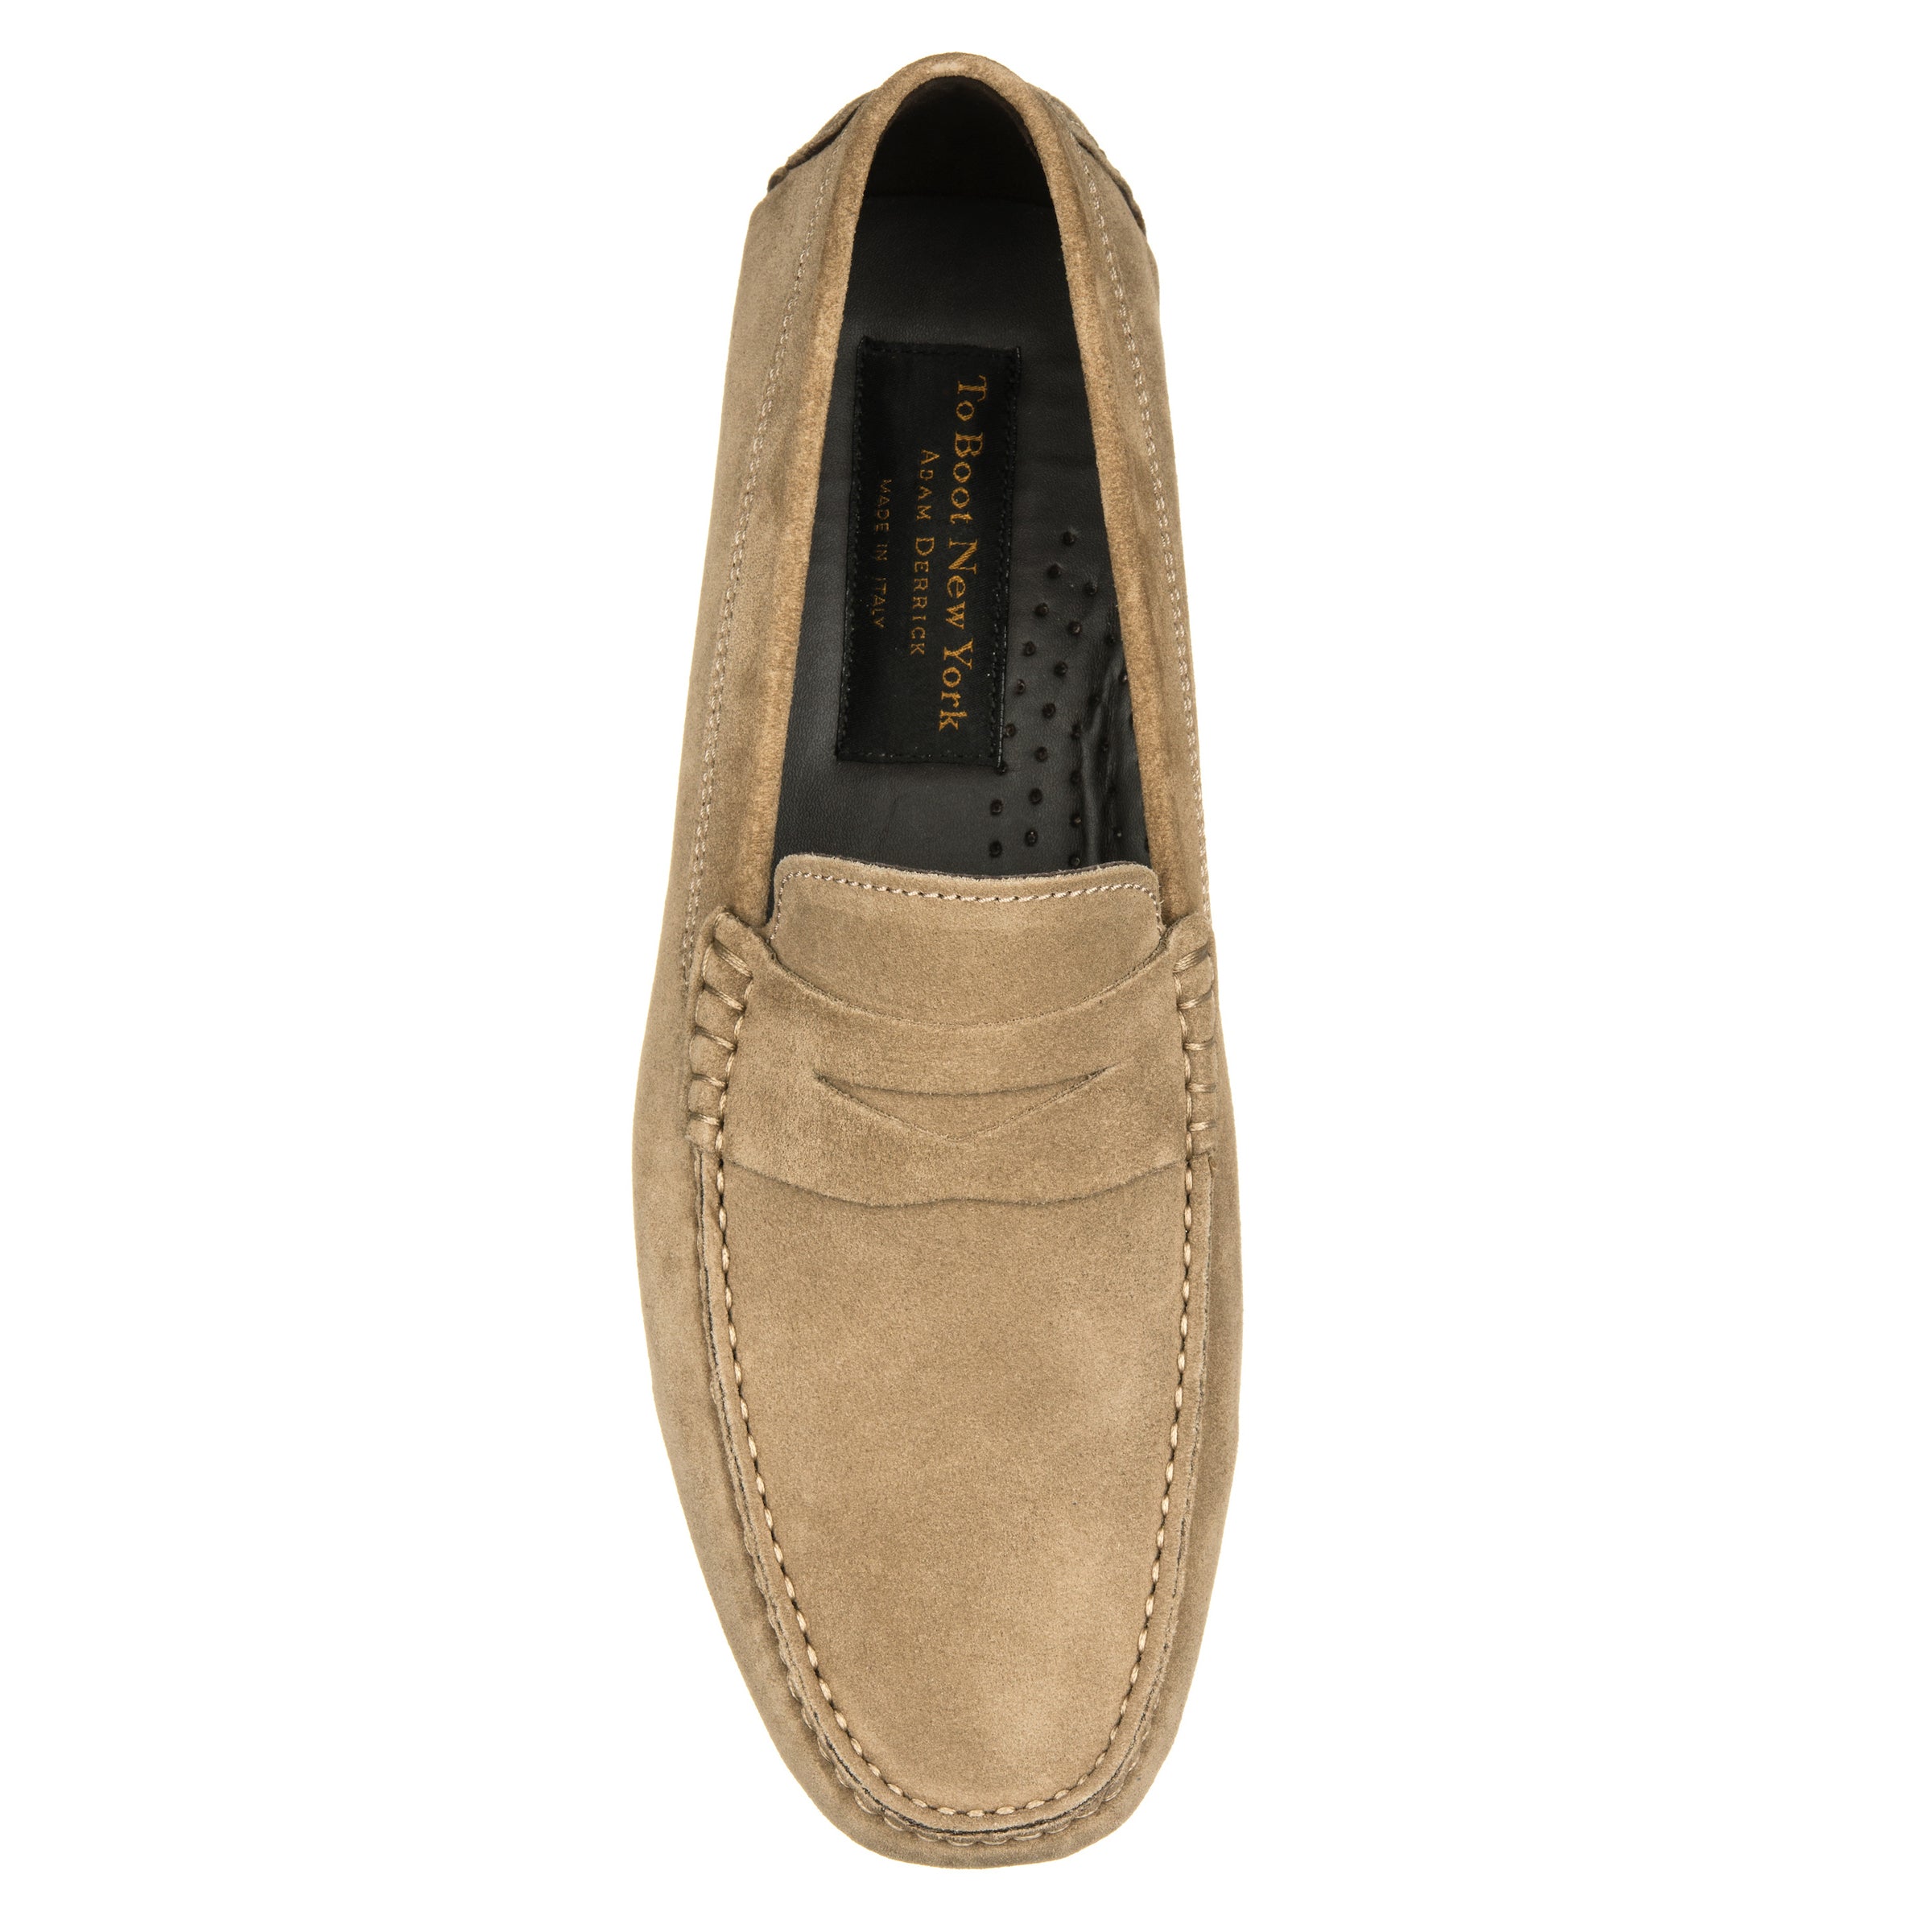 Mitchum Taupe Suede Driving Shoe